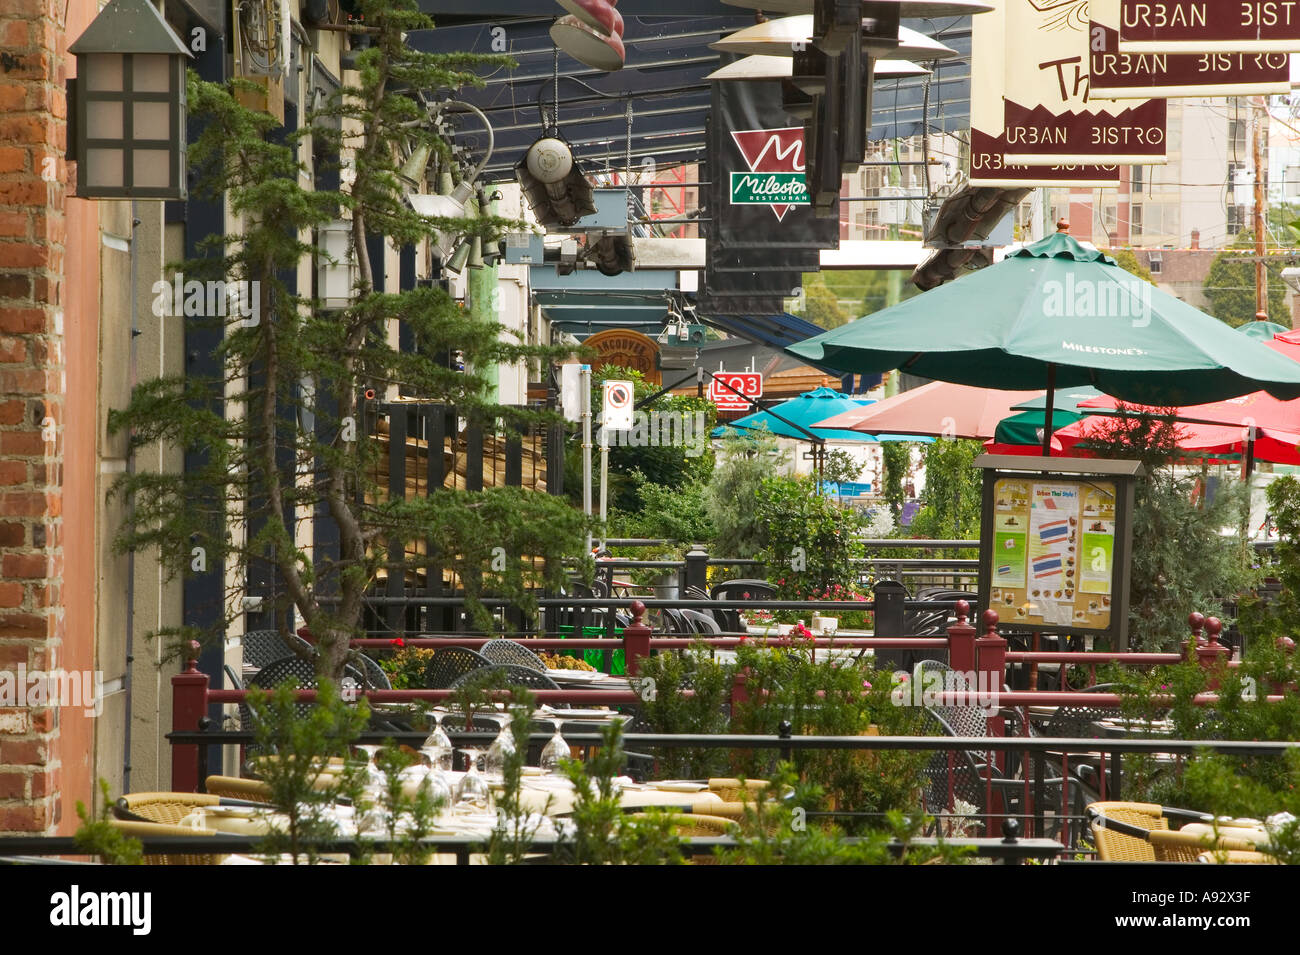 Restaurant and shopping district of Yaletown Vancouver British Columbia Canada Stock Photo